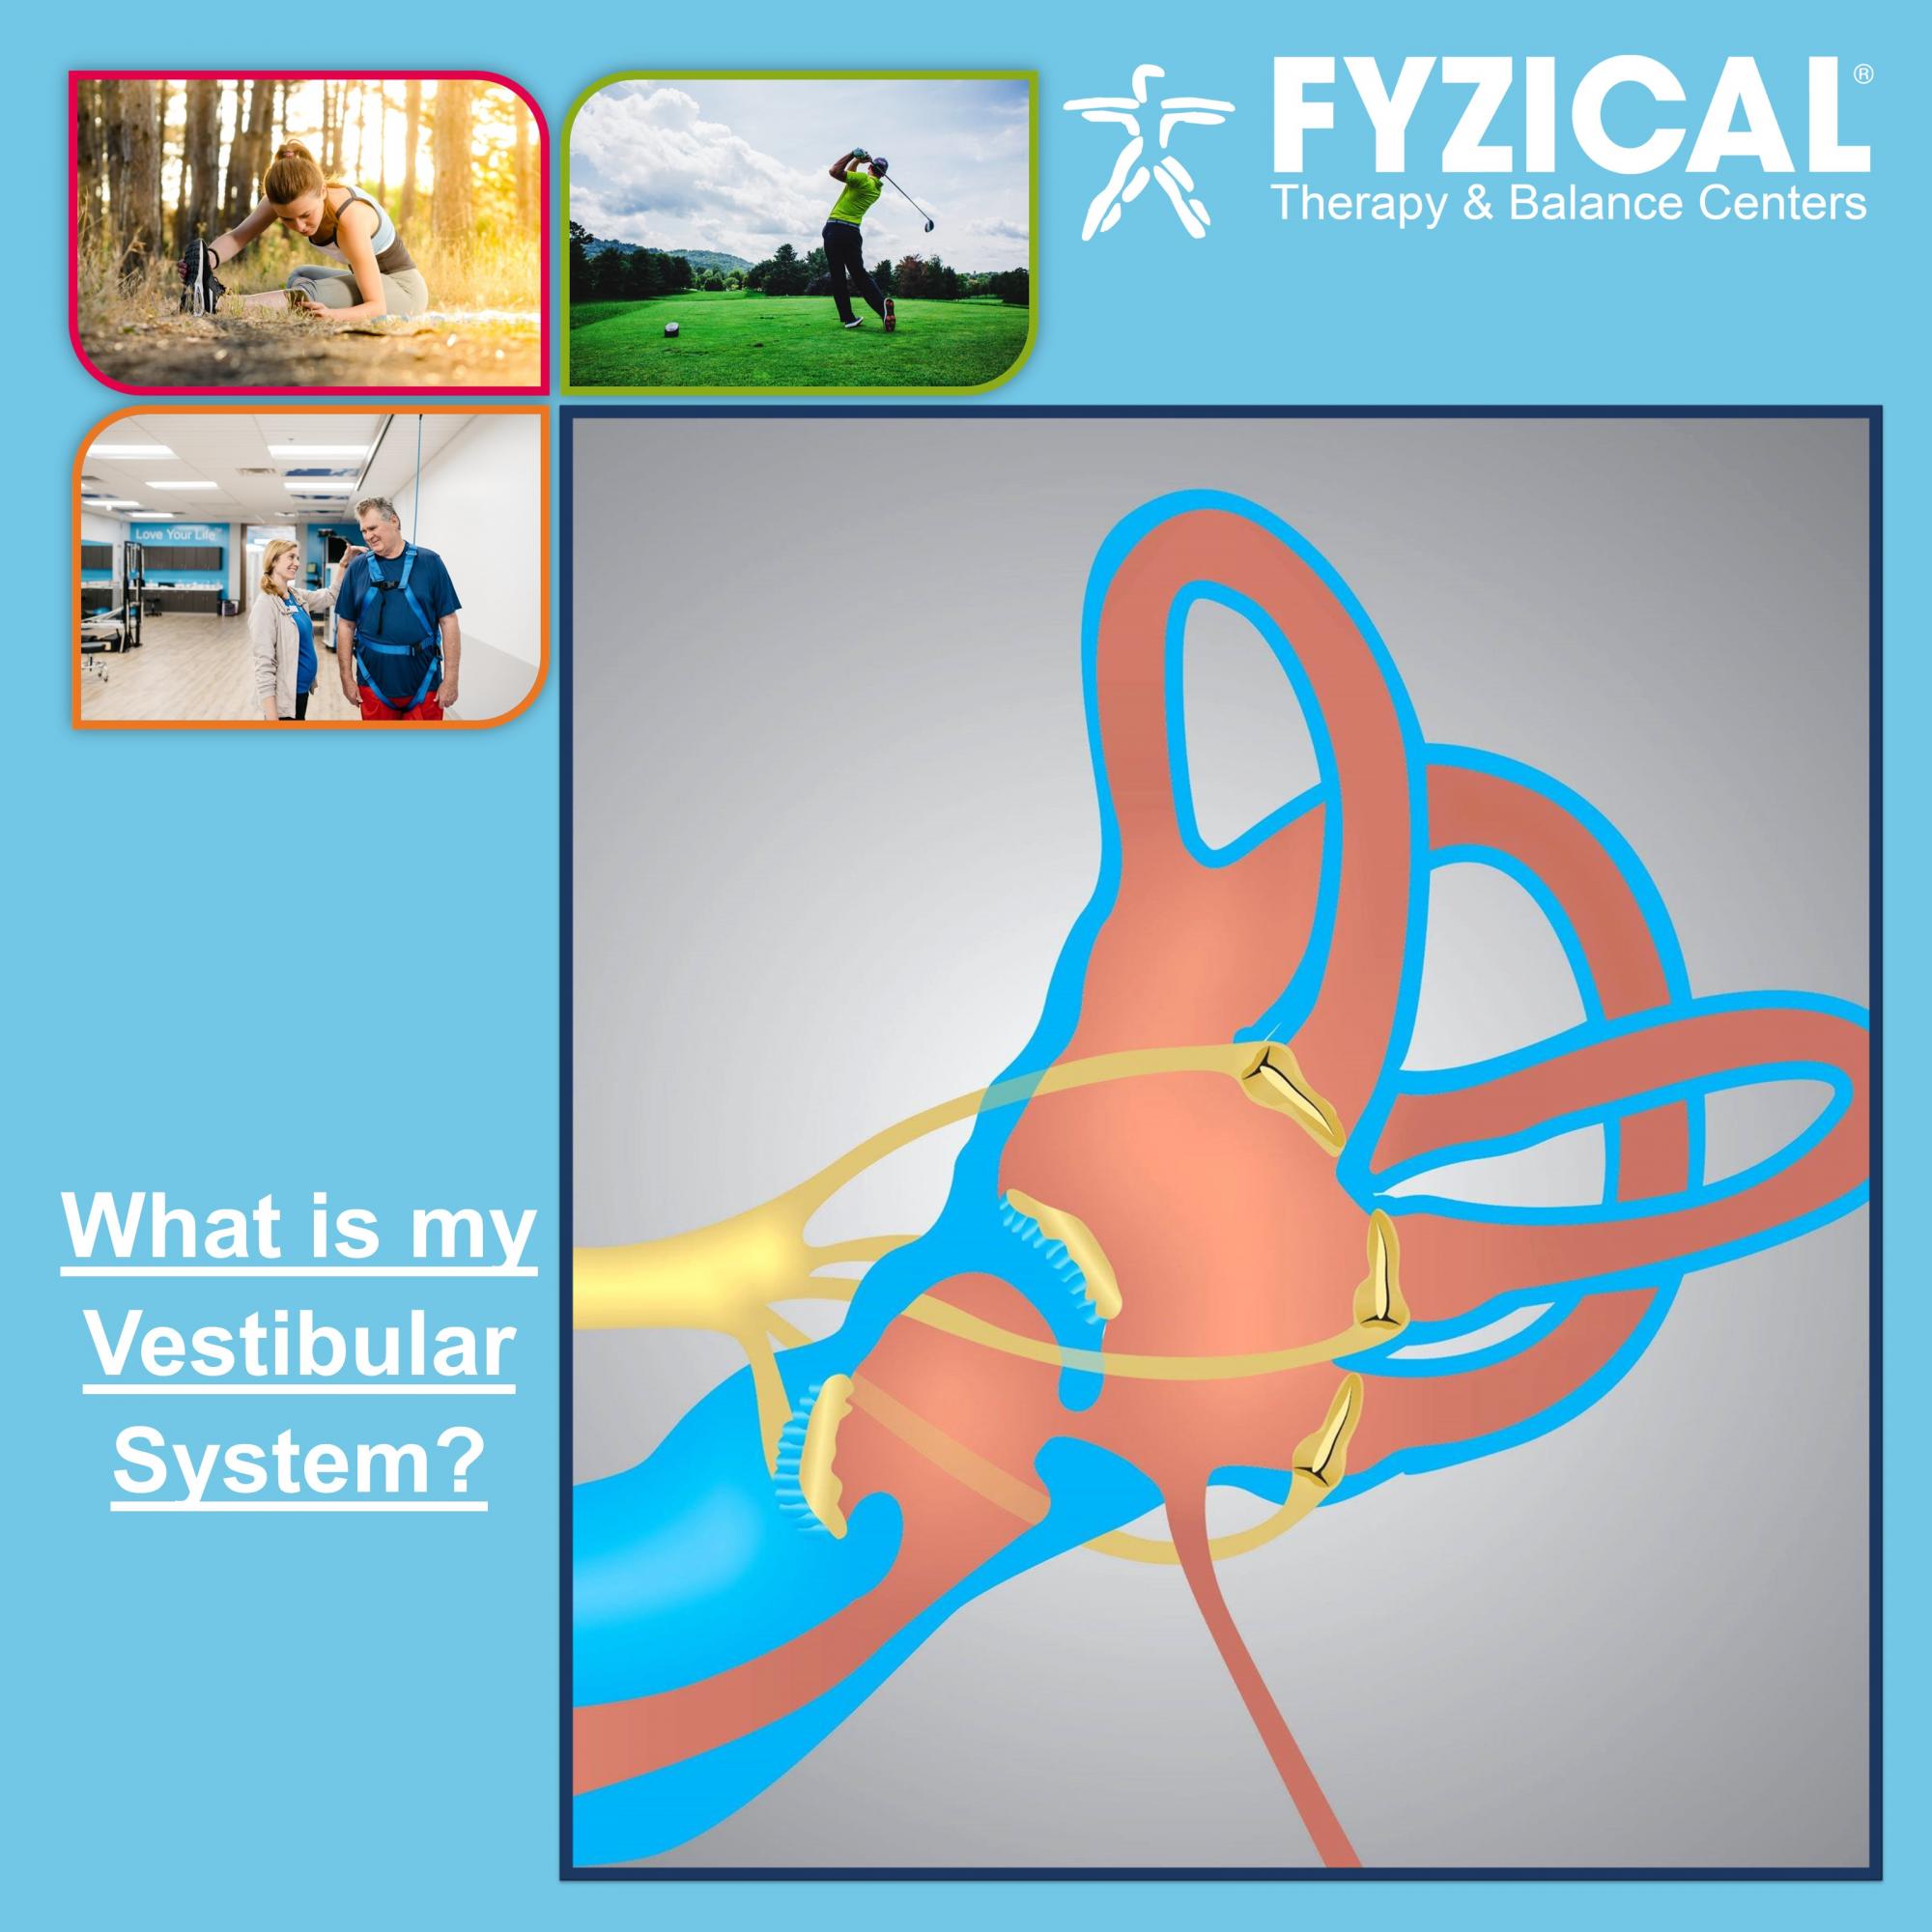 Your Vestibular System is like the gyroscope in your smart phone. If you have vertigo, vestibular rehabilitation by the physical therapists at FYZICAL Therapy & Balance Centers of Oklahoma City (OKC) can help.